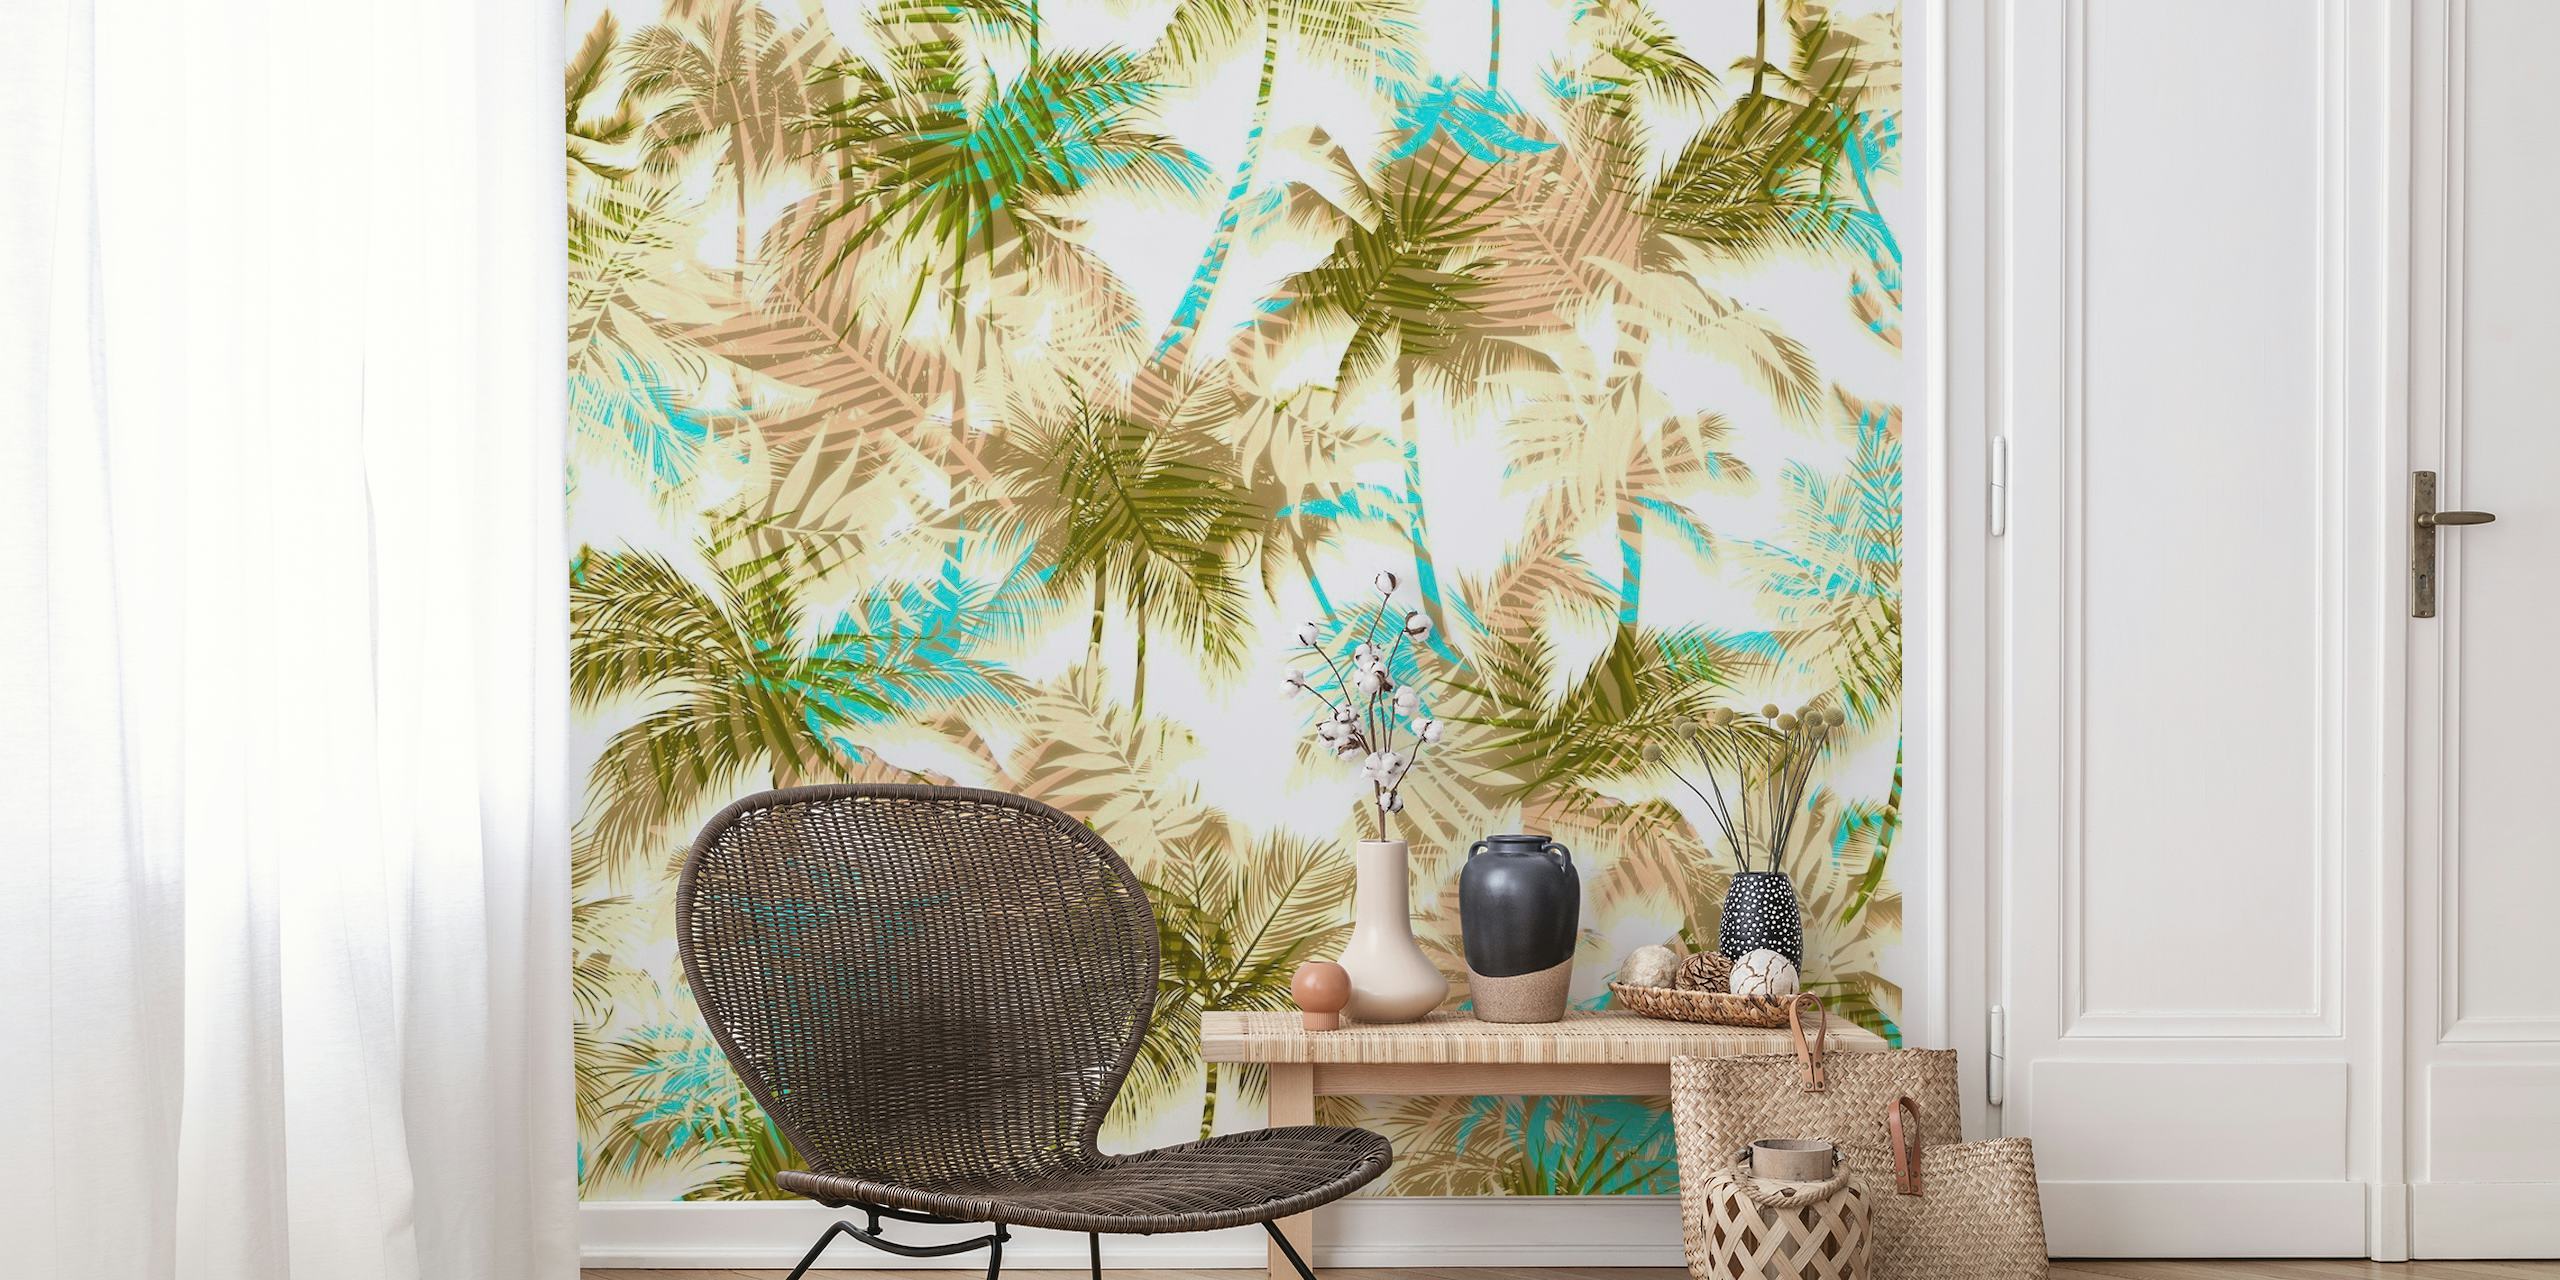 Abstract leaf patterns intermingled with tropical palm trees in soft, muted tones for wall decor